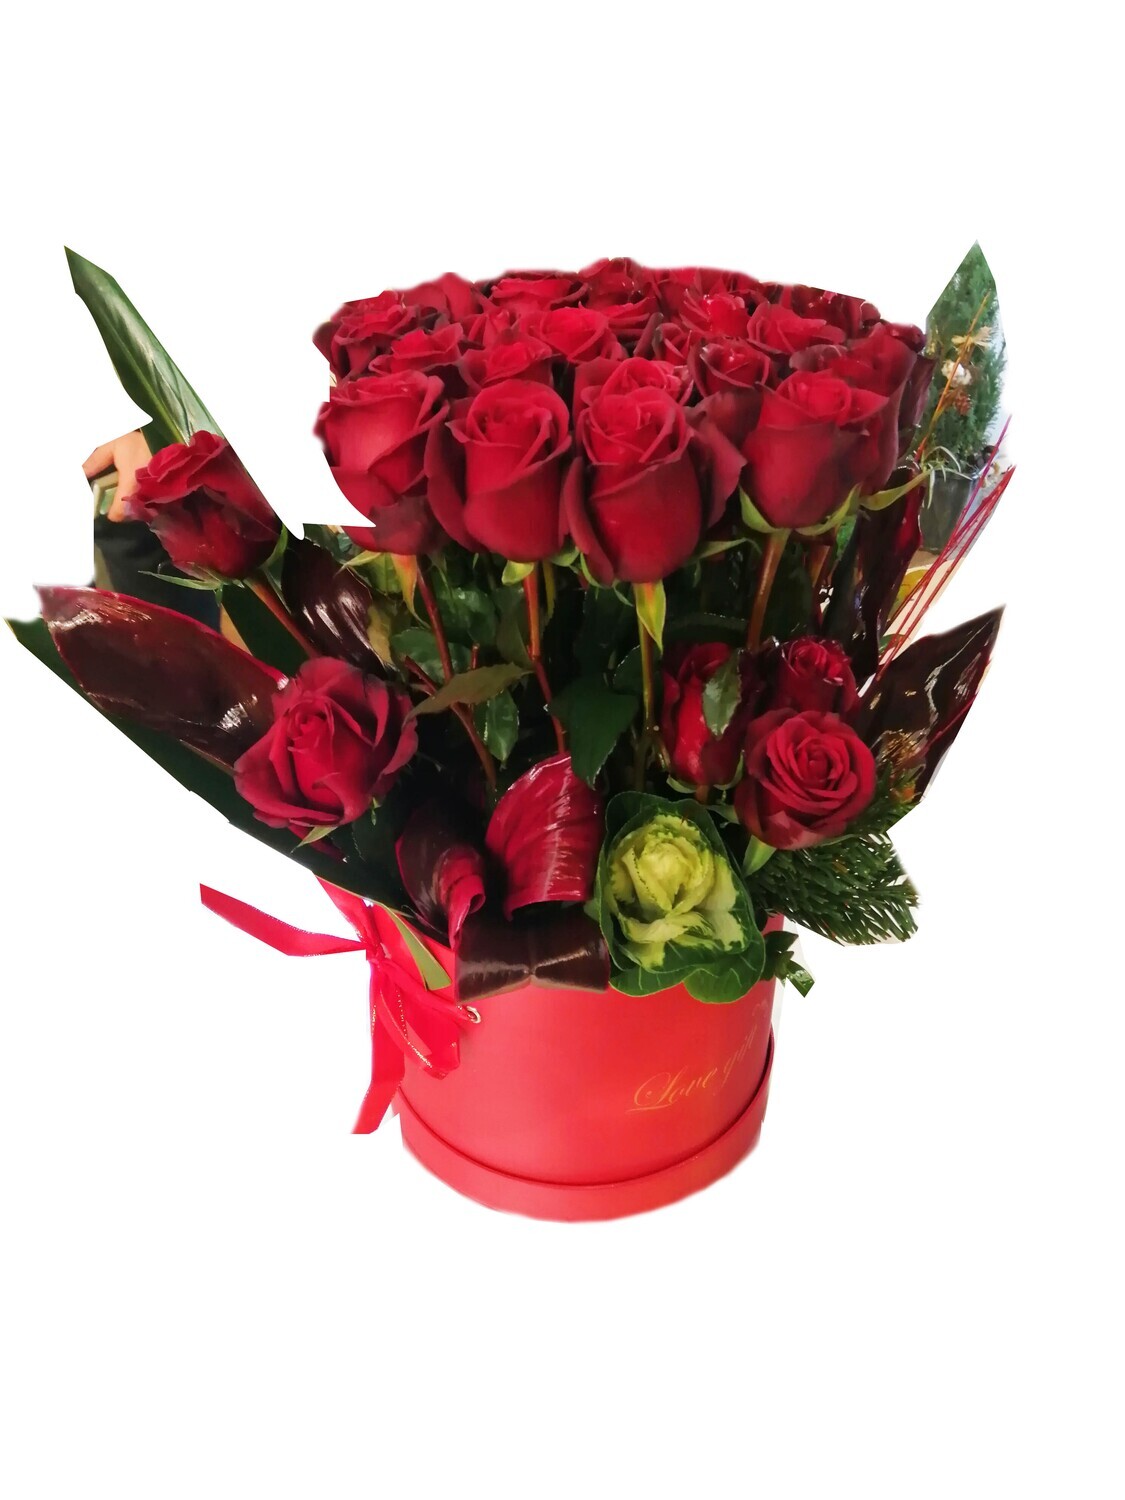 40 Roses Red passion Lebanon